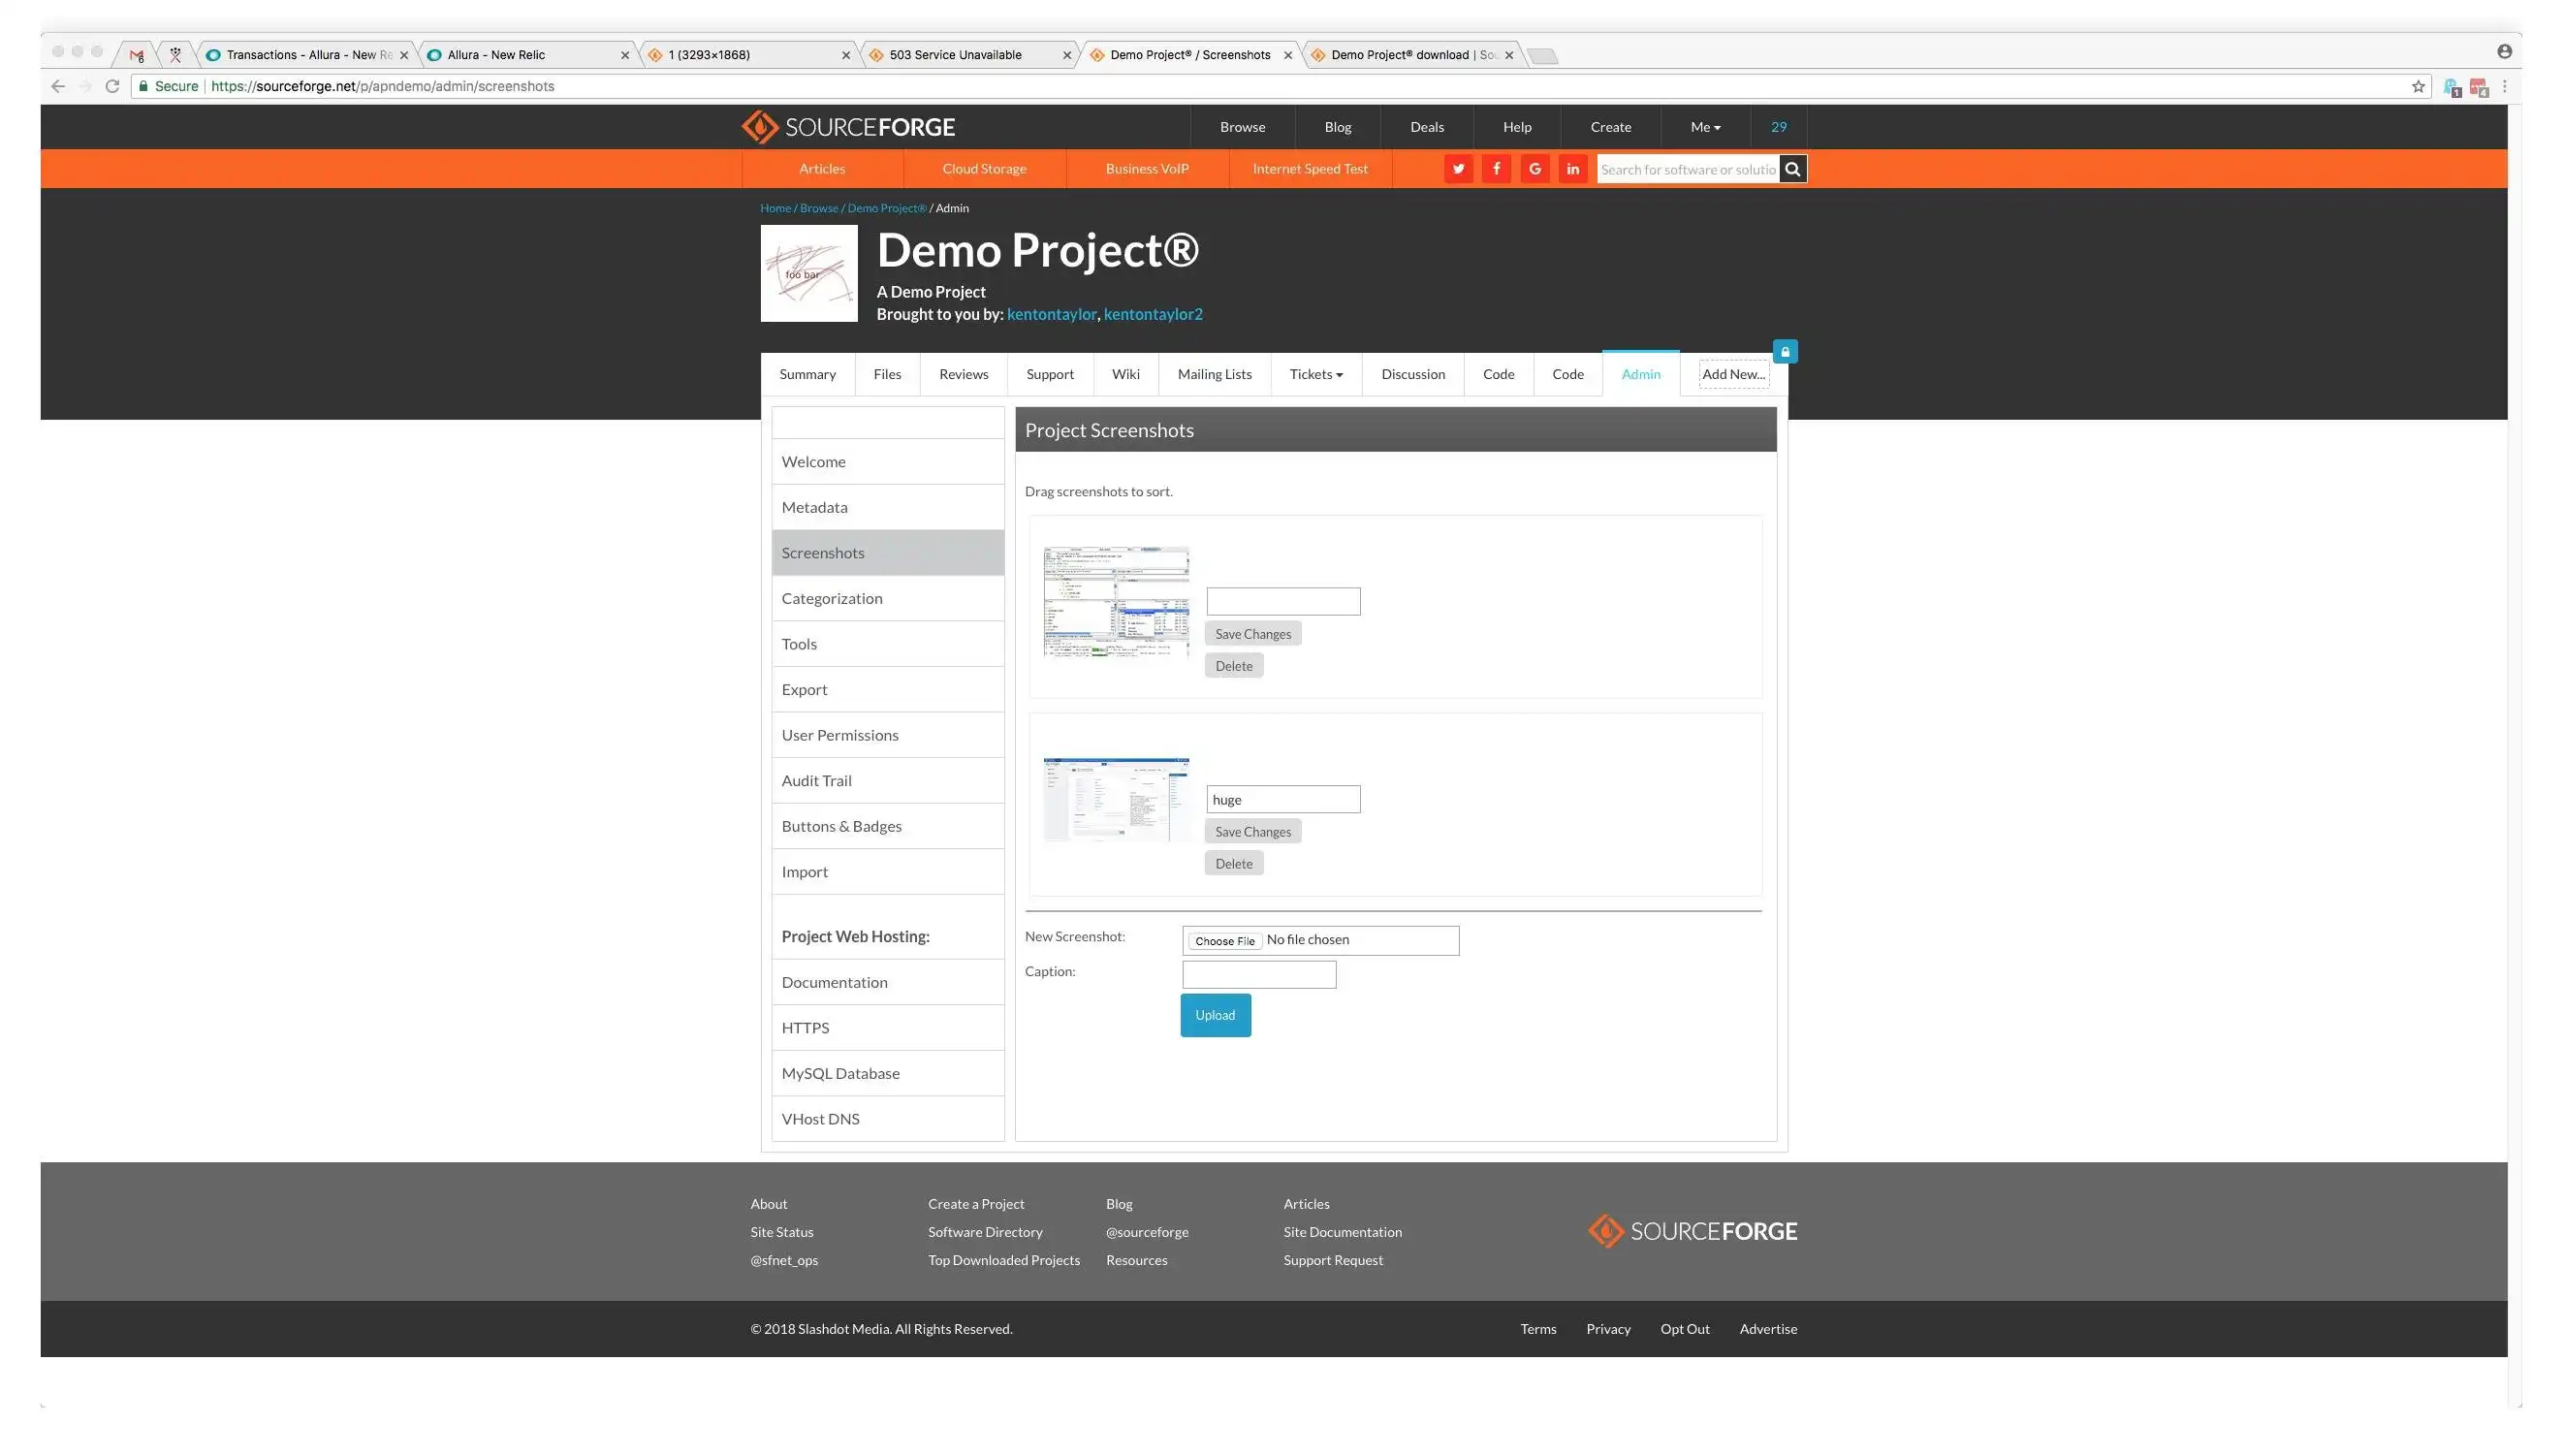 Download web tool or web app Demo Project®